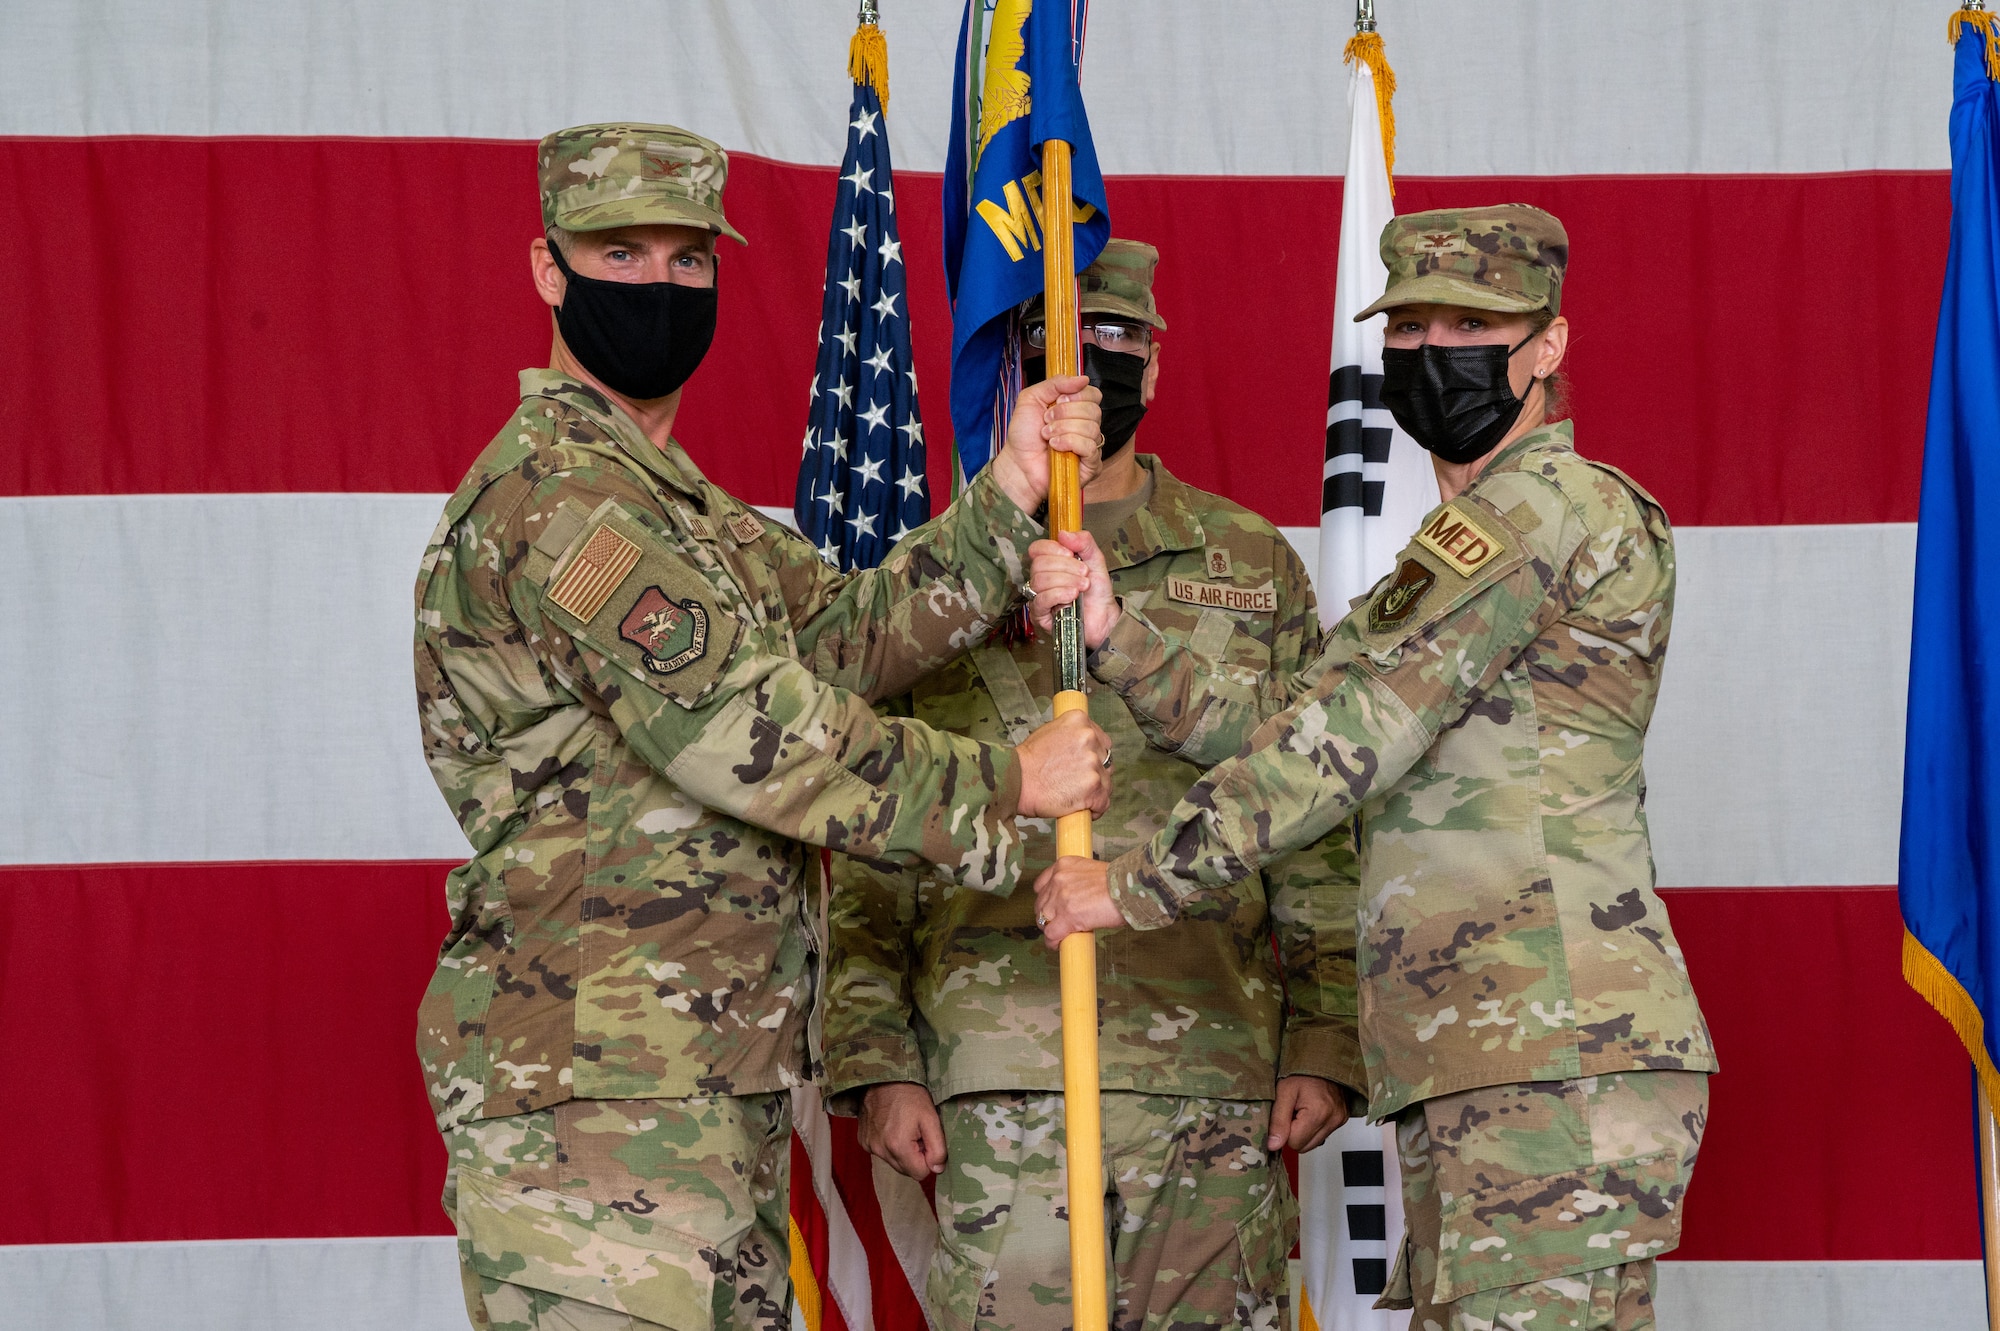 Col. Joshua Wood, 51st Fighter Wing commander, left, presents Col. Jennifer Vecchione, with the 51st Medical Group guidon during the change of command ceremony at Osan Air Base, Republic of Korea, July 12, 2021. This act marks the official beginning of Vecchione’s command of the 51st MDG. (U.S. Air Force photo by Tech. Sgt. Nicholas Alder)